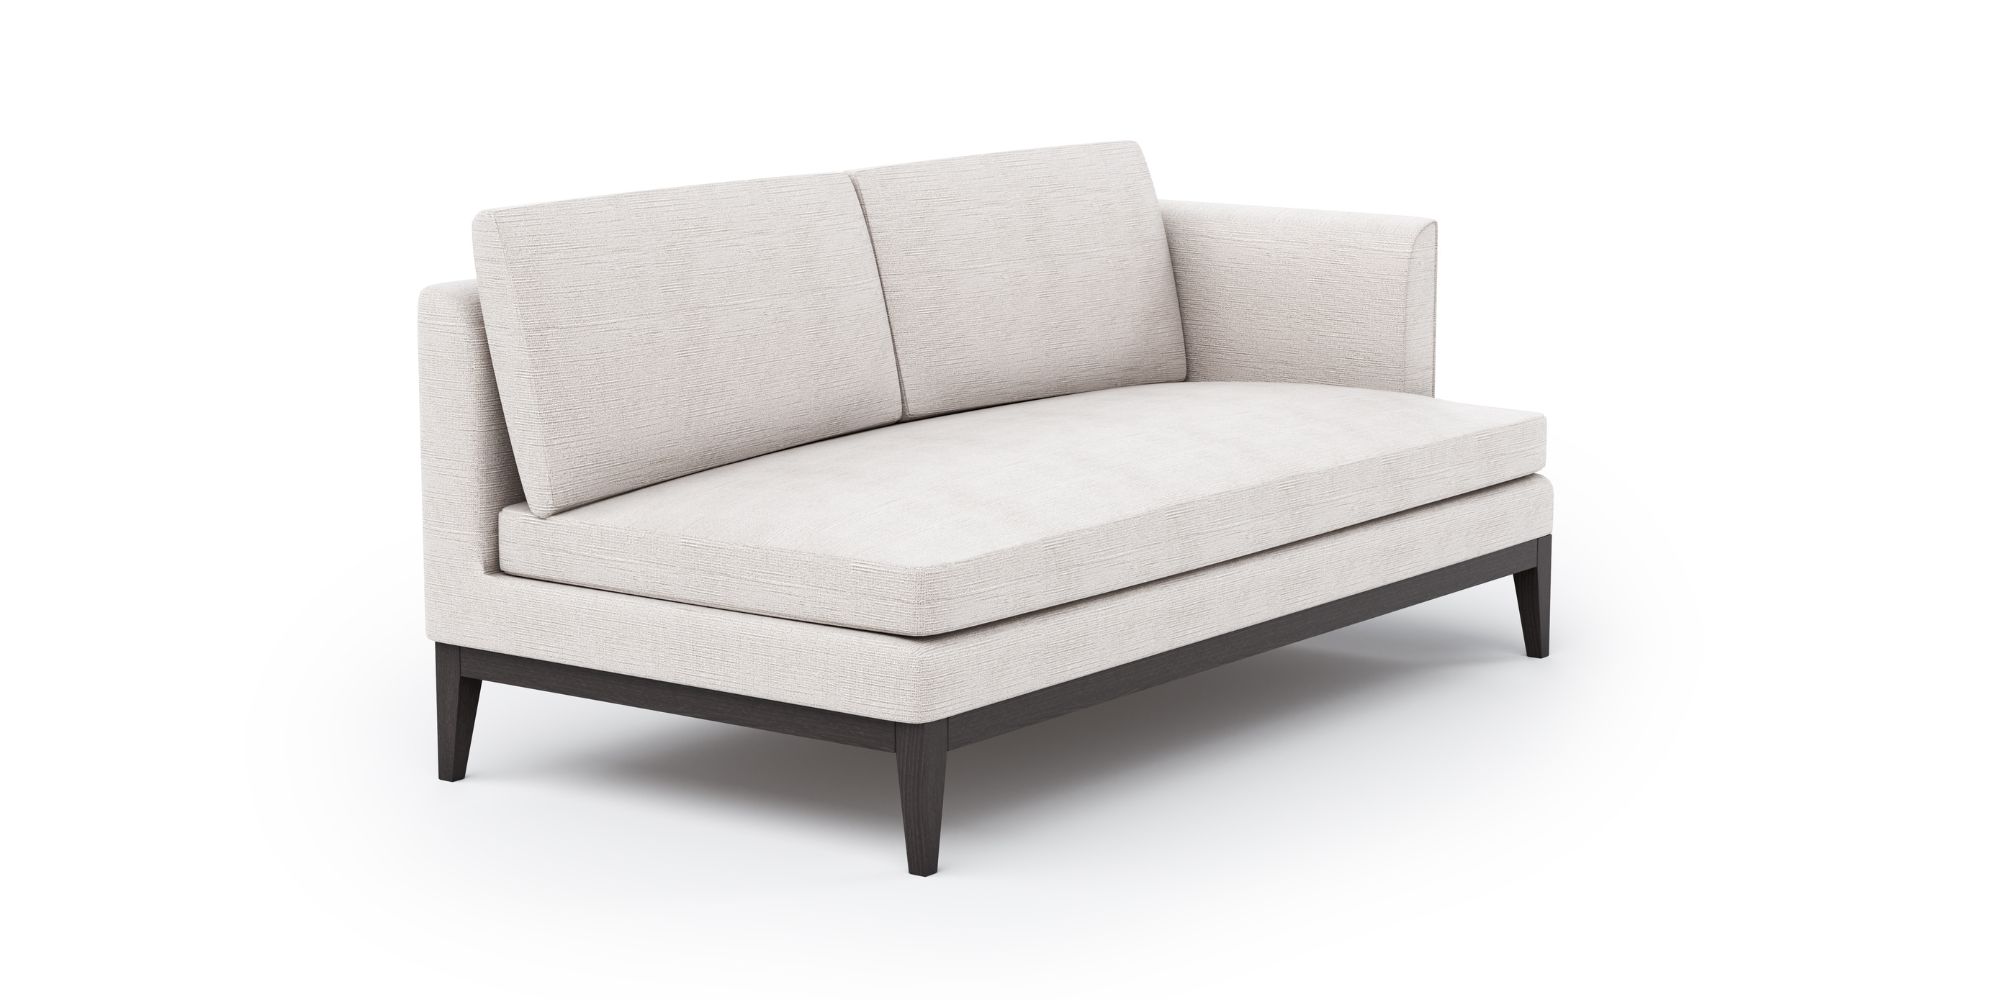 Porto Left Arm/End Section 3 Seater in Outdoor Modular Sofas for Porto collection